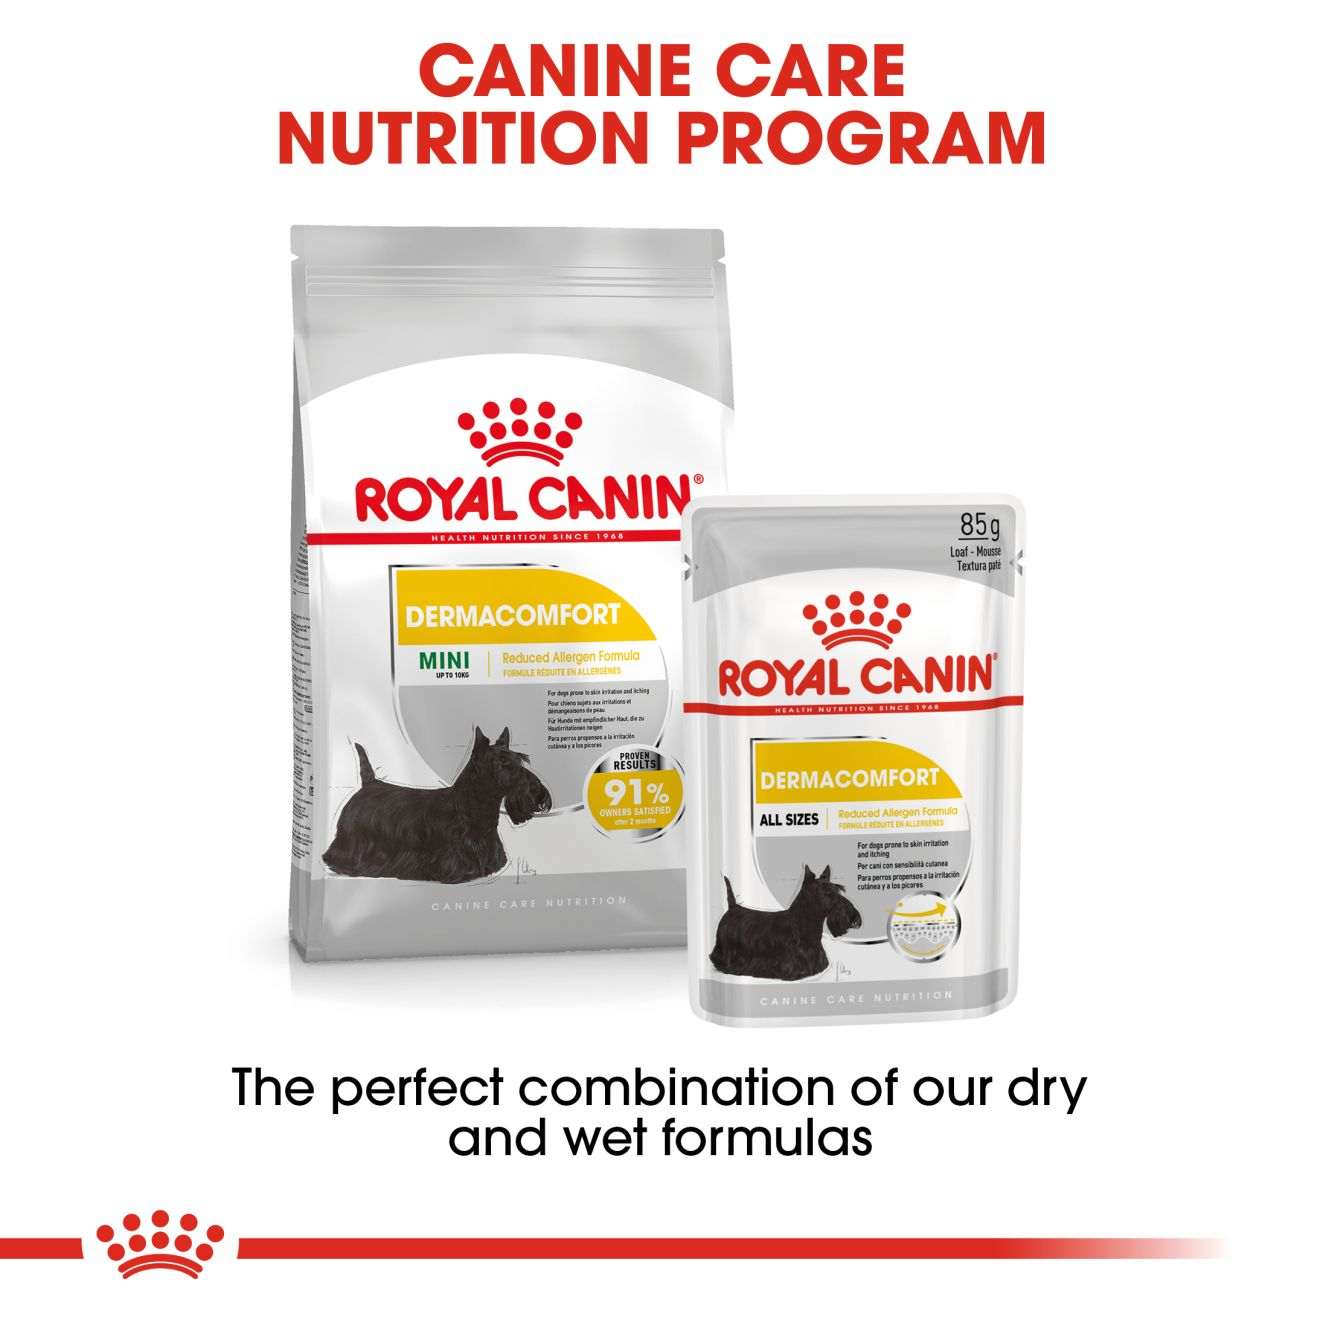 royal canin dermacomfort puppy